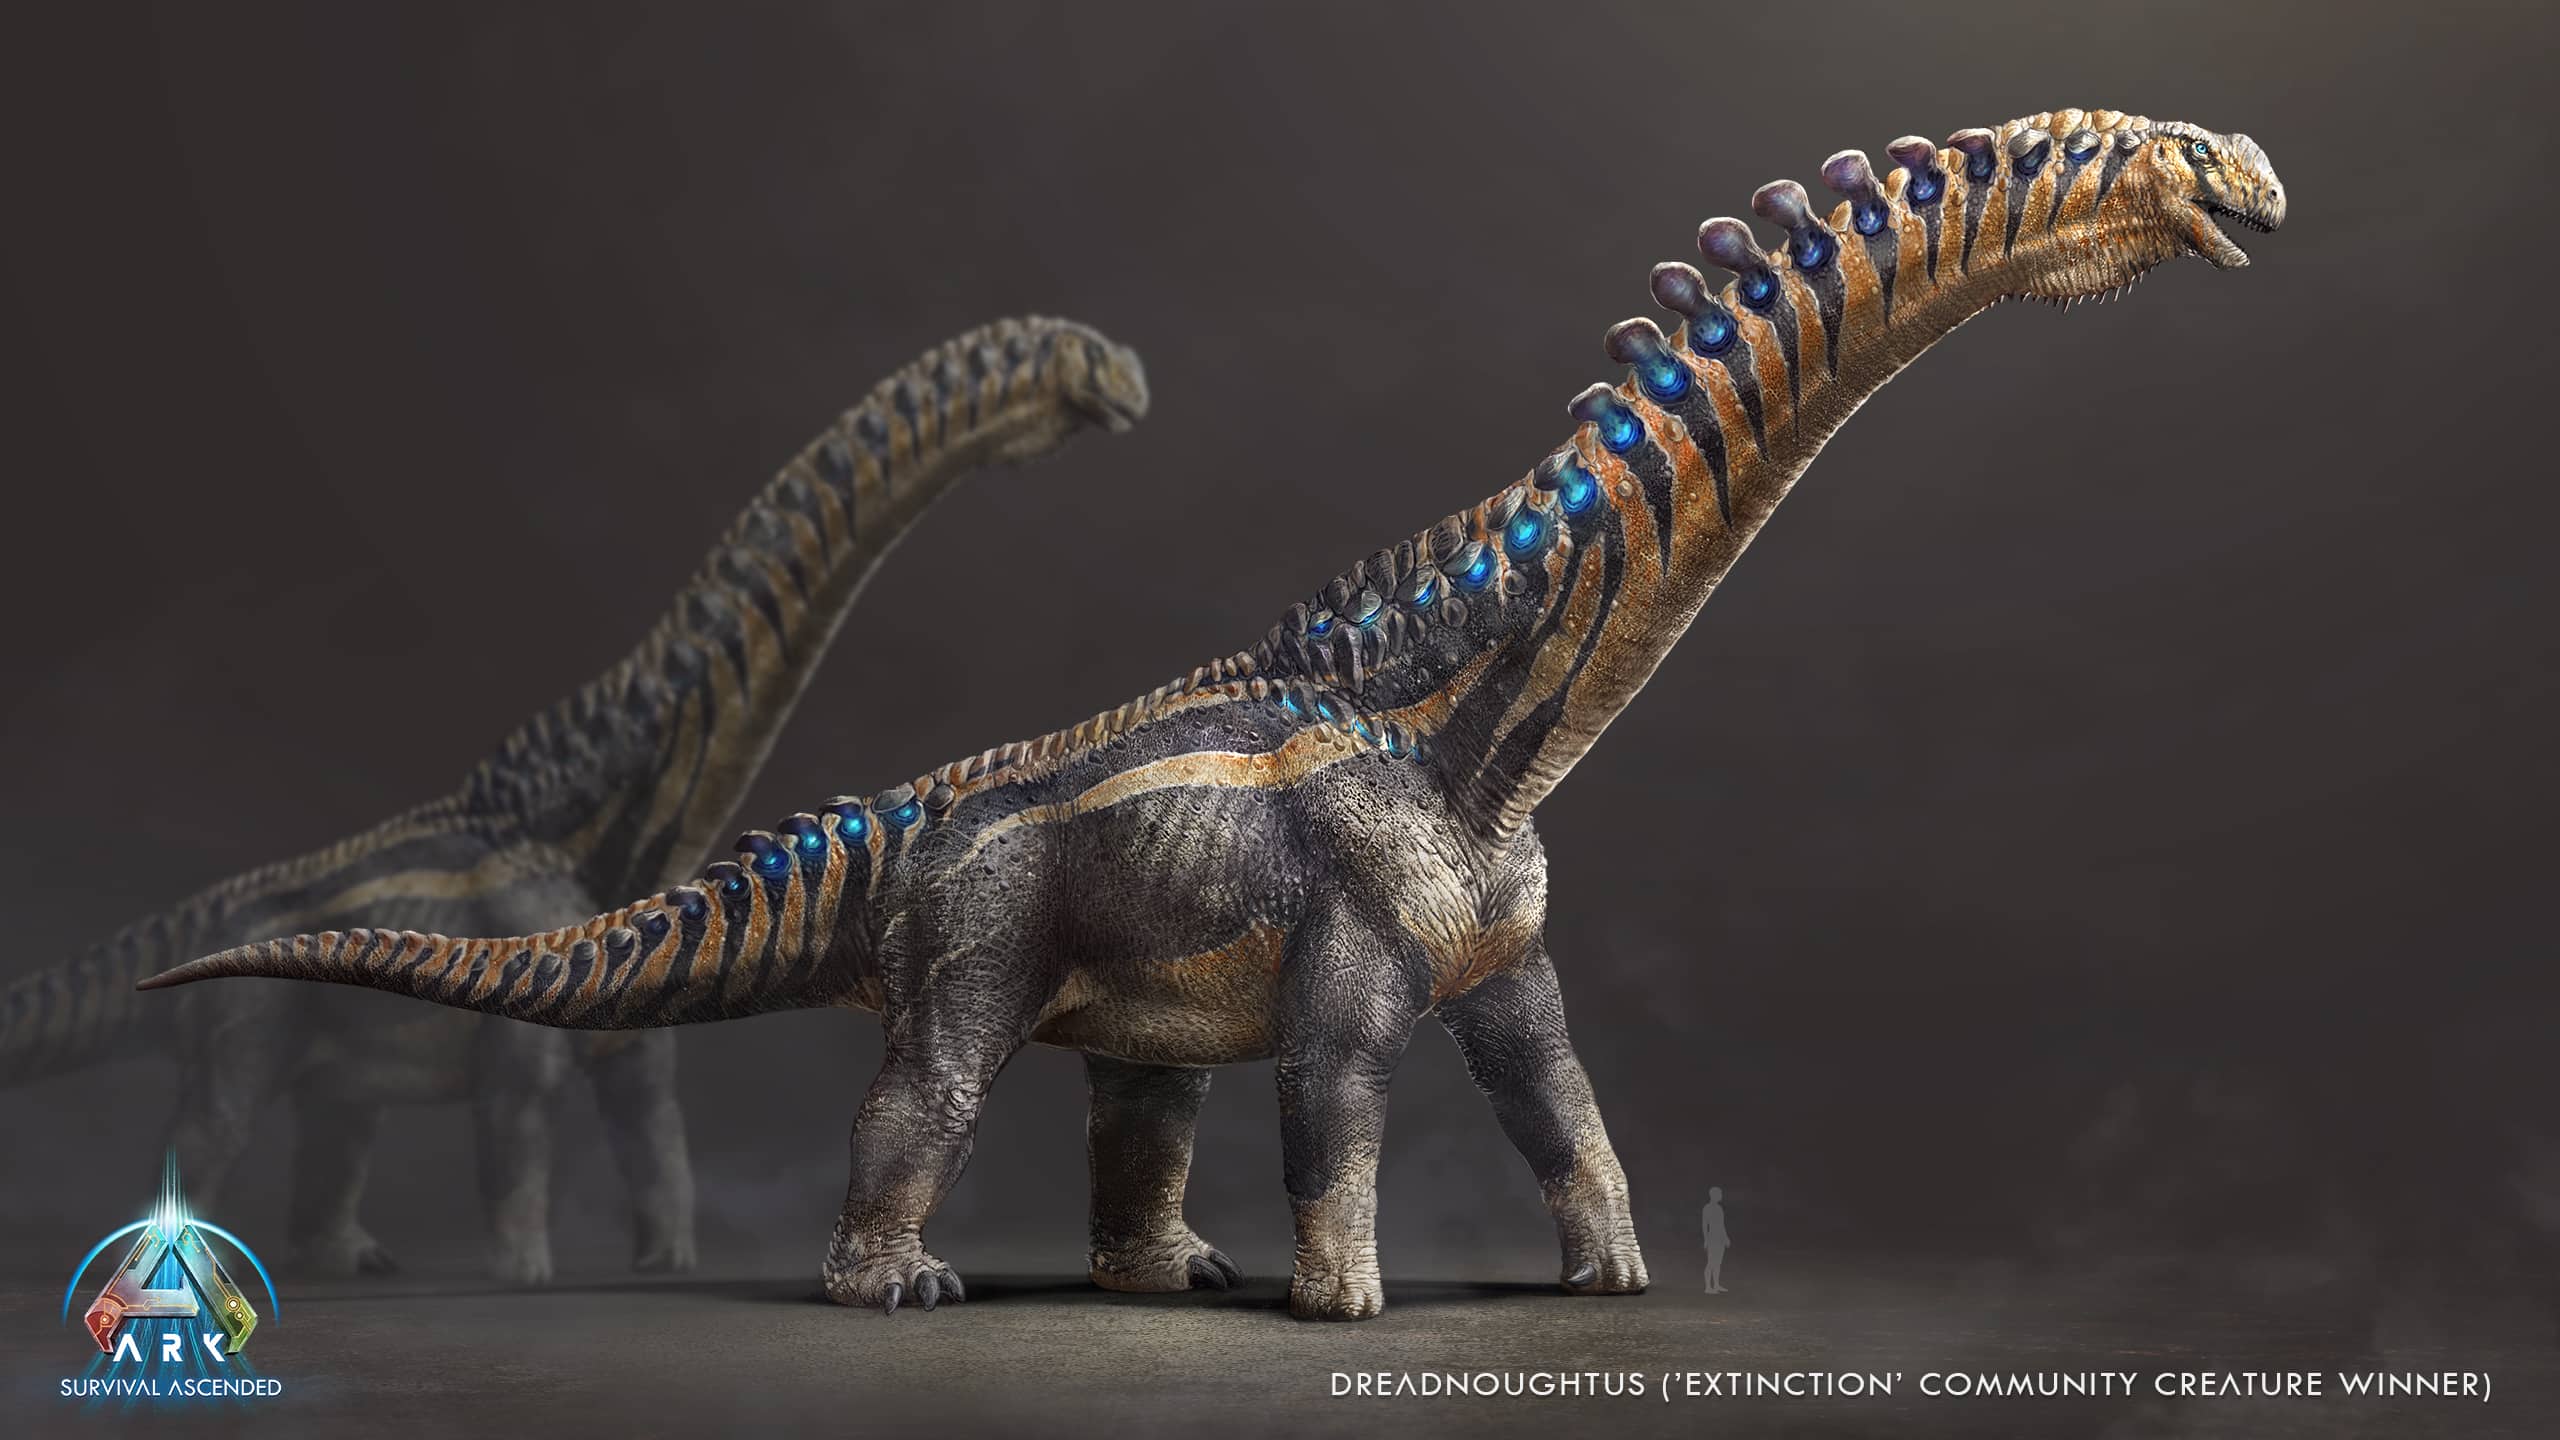 ARK: Survival Ascended on X: As we continue our journey towards ARK:  Survival Ascended, Fasolasuchus is the first of many new additions and  reveals coming your way. With over 49k votes, Fasolasuchus